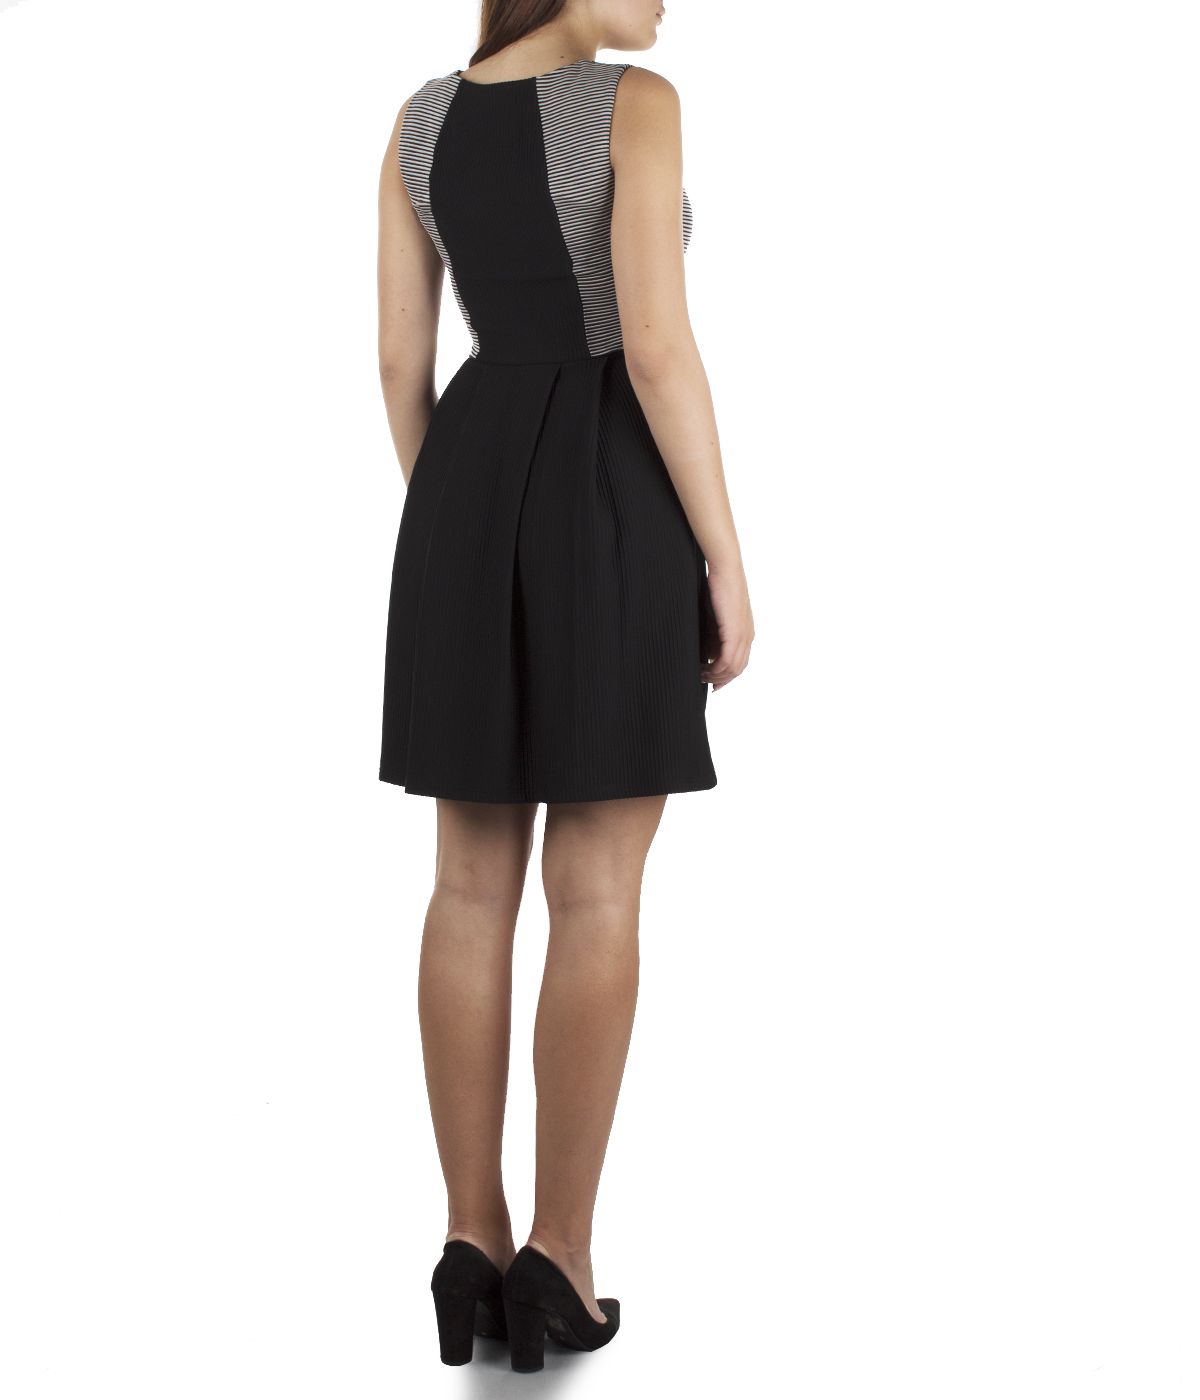 Two-toned sleeveless dress with rayon 2